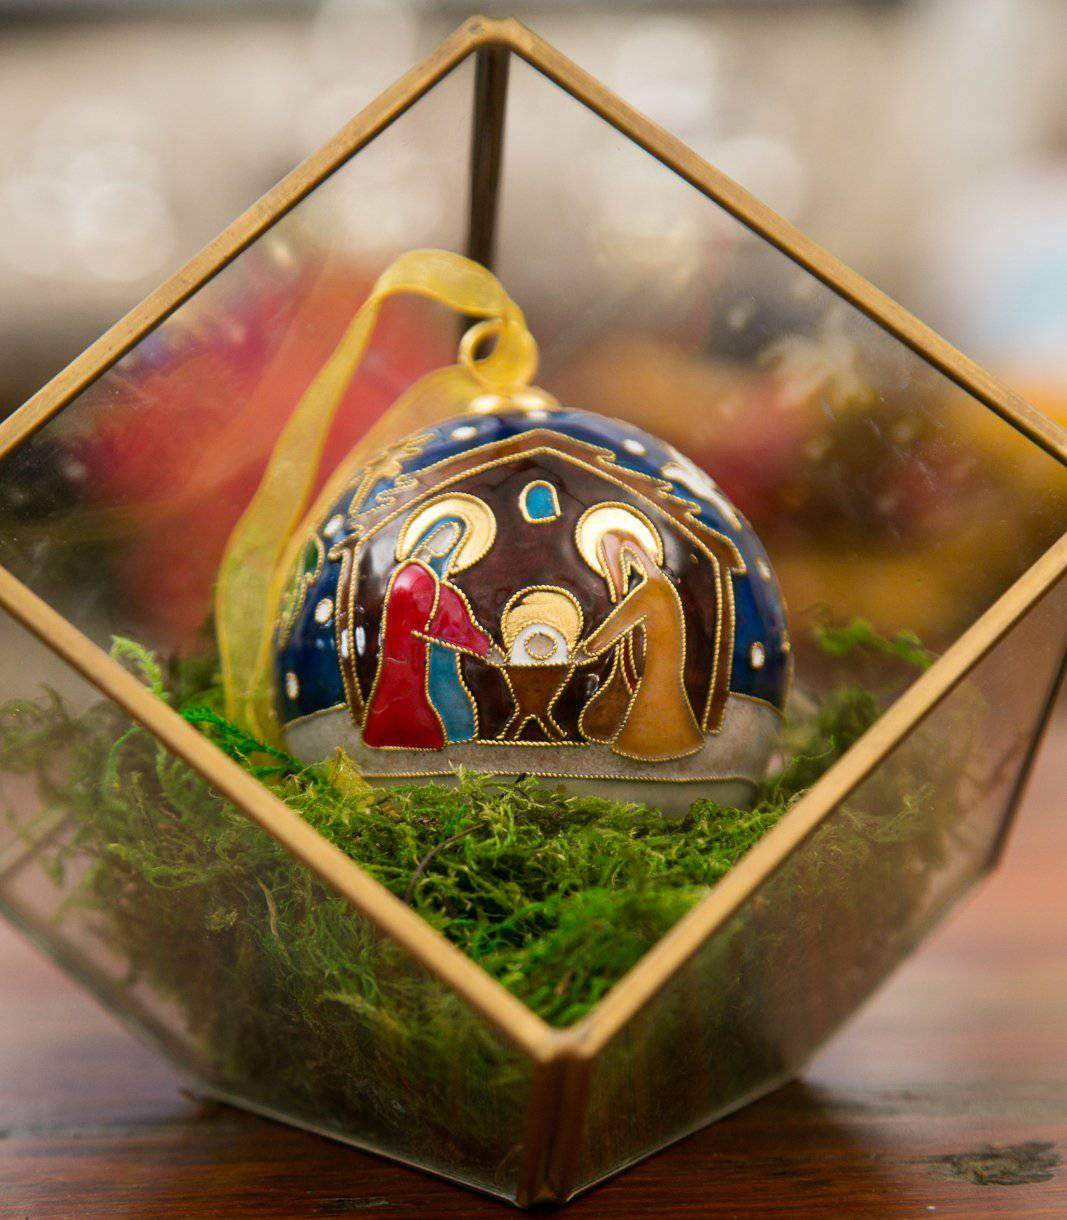 Nativity Scene with Star of David Round Cloisonné Christmas Ornament